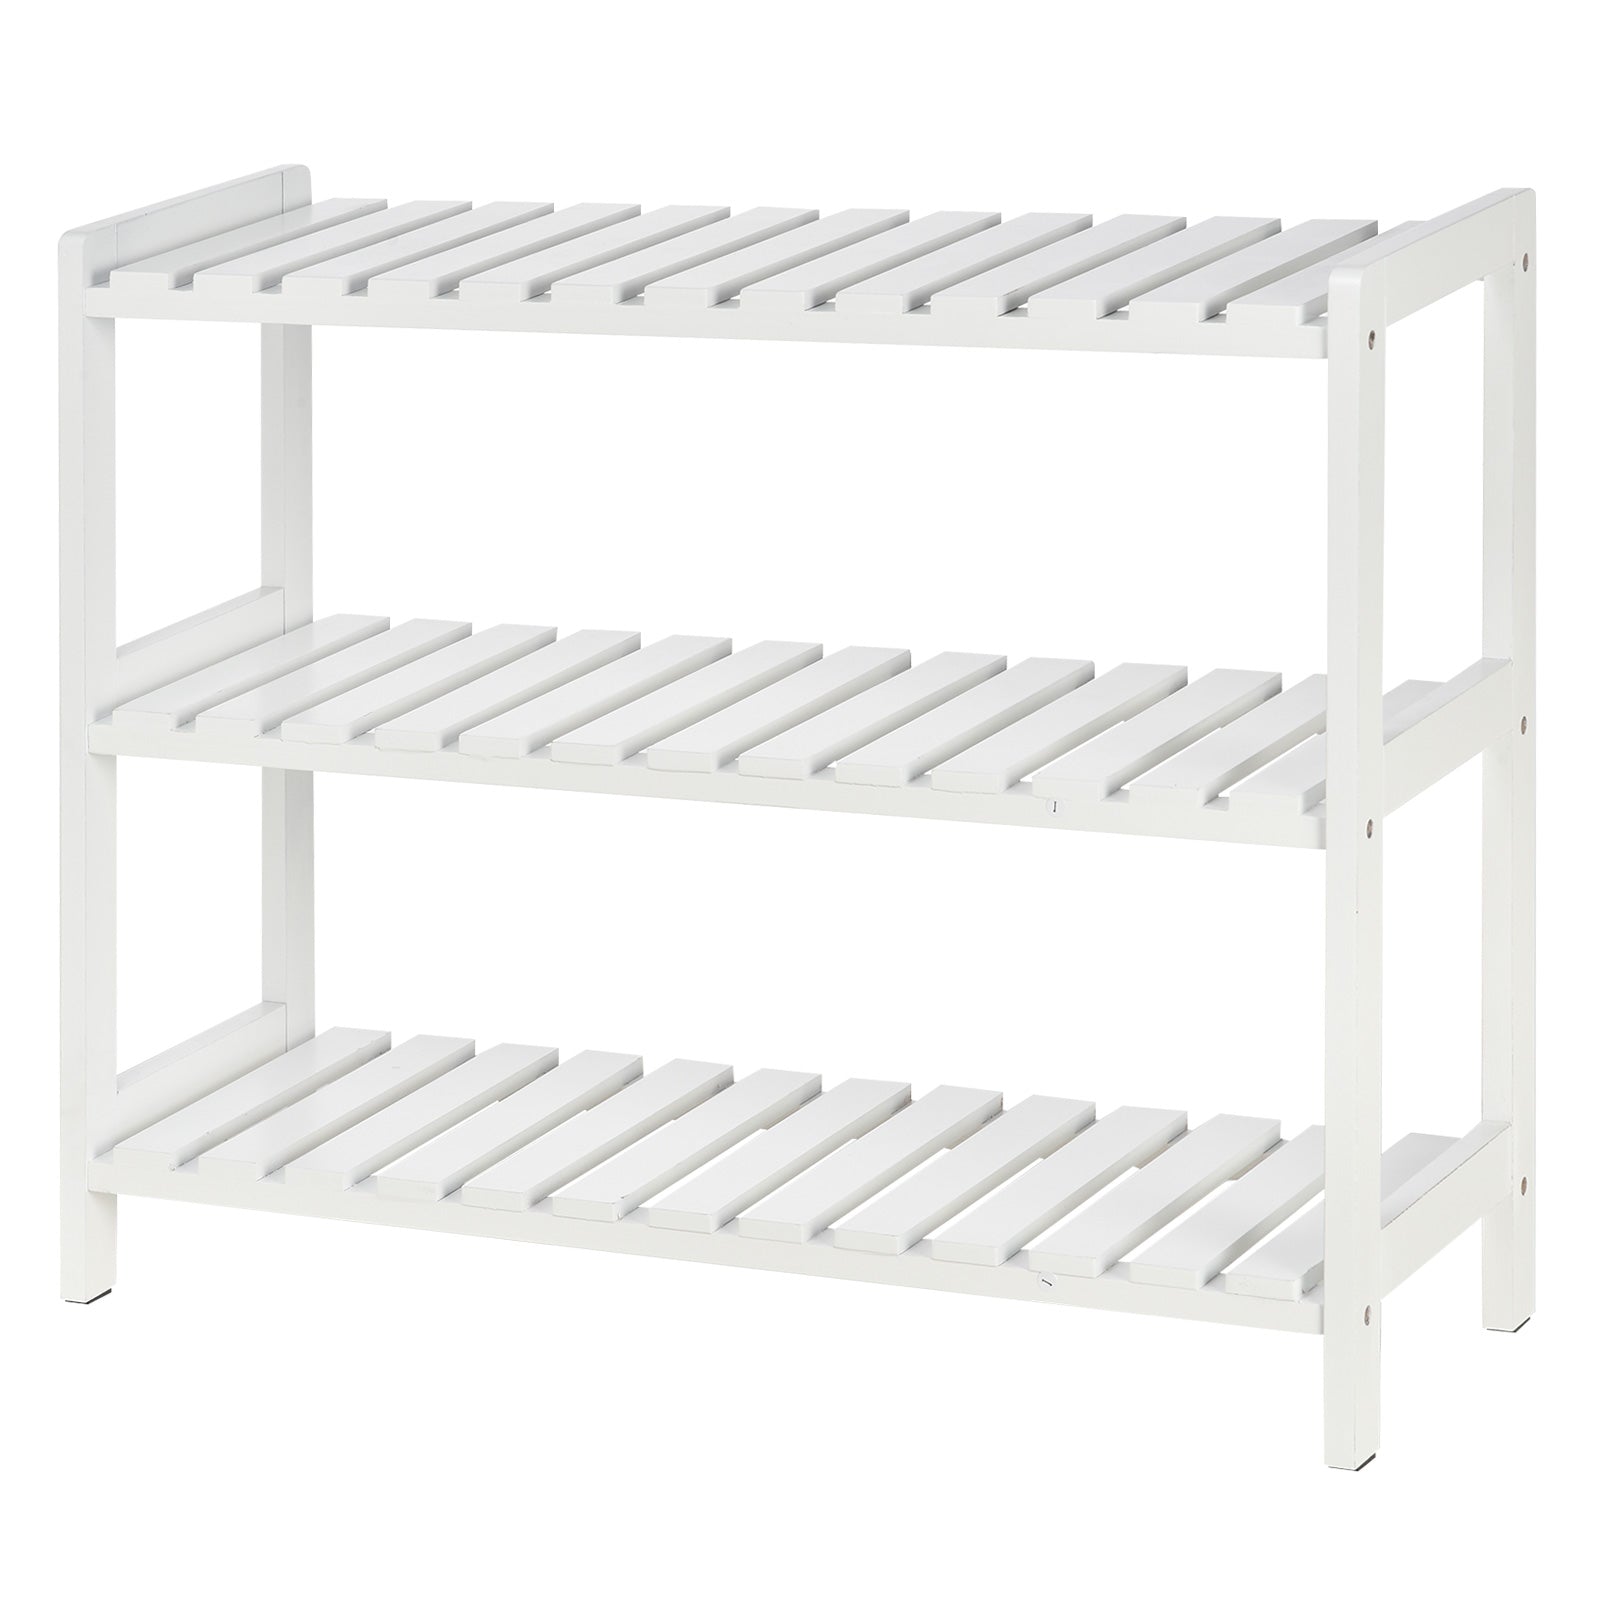 3-Tier Shoe Rack Wood Frame Slatted Shelves Spacious Open Hygienic Storage Home Hallway Furniture Family Guests 70L x 26W x 57.5H cm - White-0